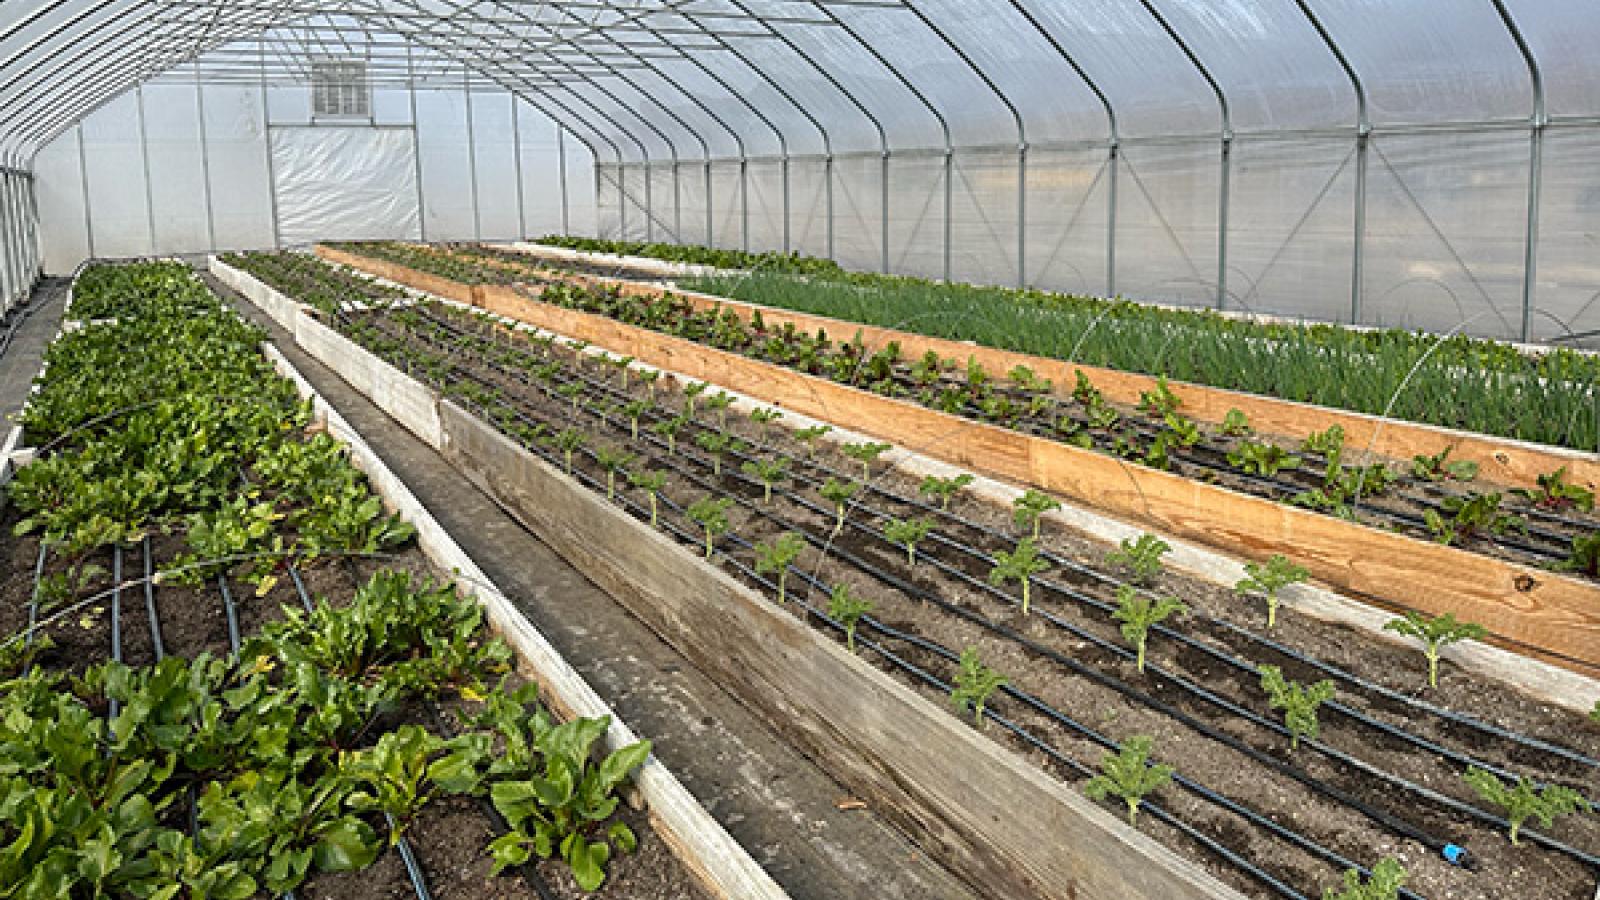 Rows of crops growing at the NECIC Urban Farm in Mansfield, OH